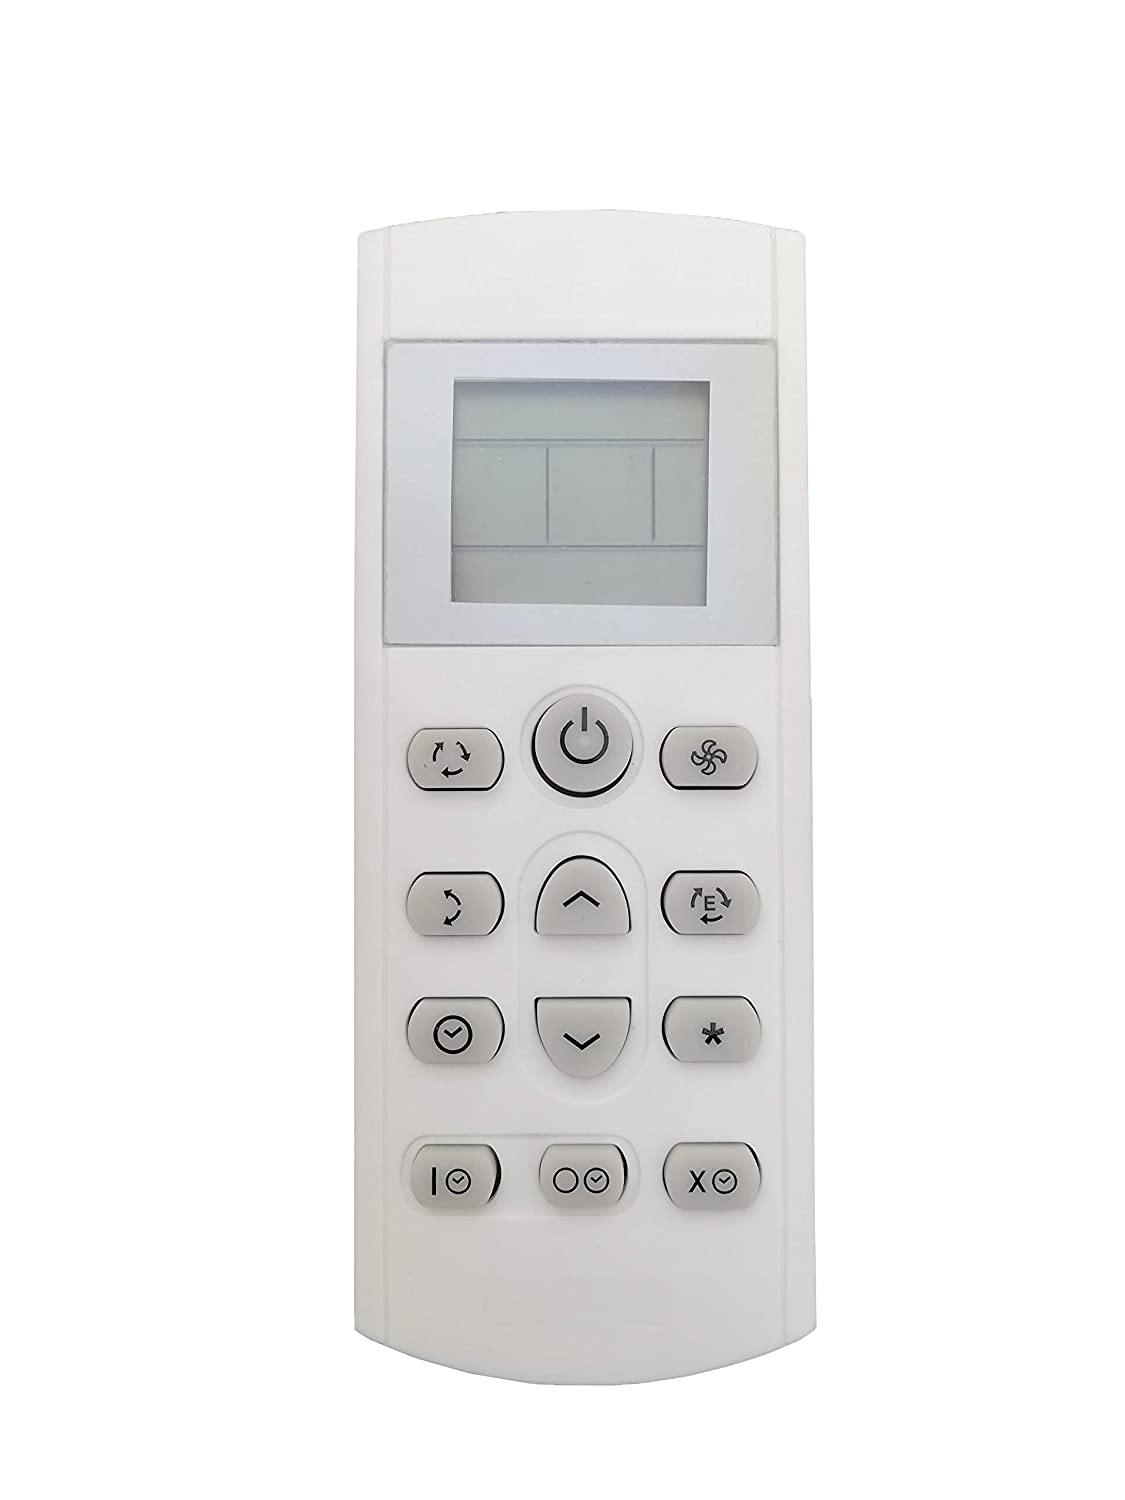 Replacement Voltas AC Remote Model 838d - China Air Conditioner Remotes :: Cheapest AC Remote Solutions